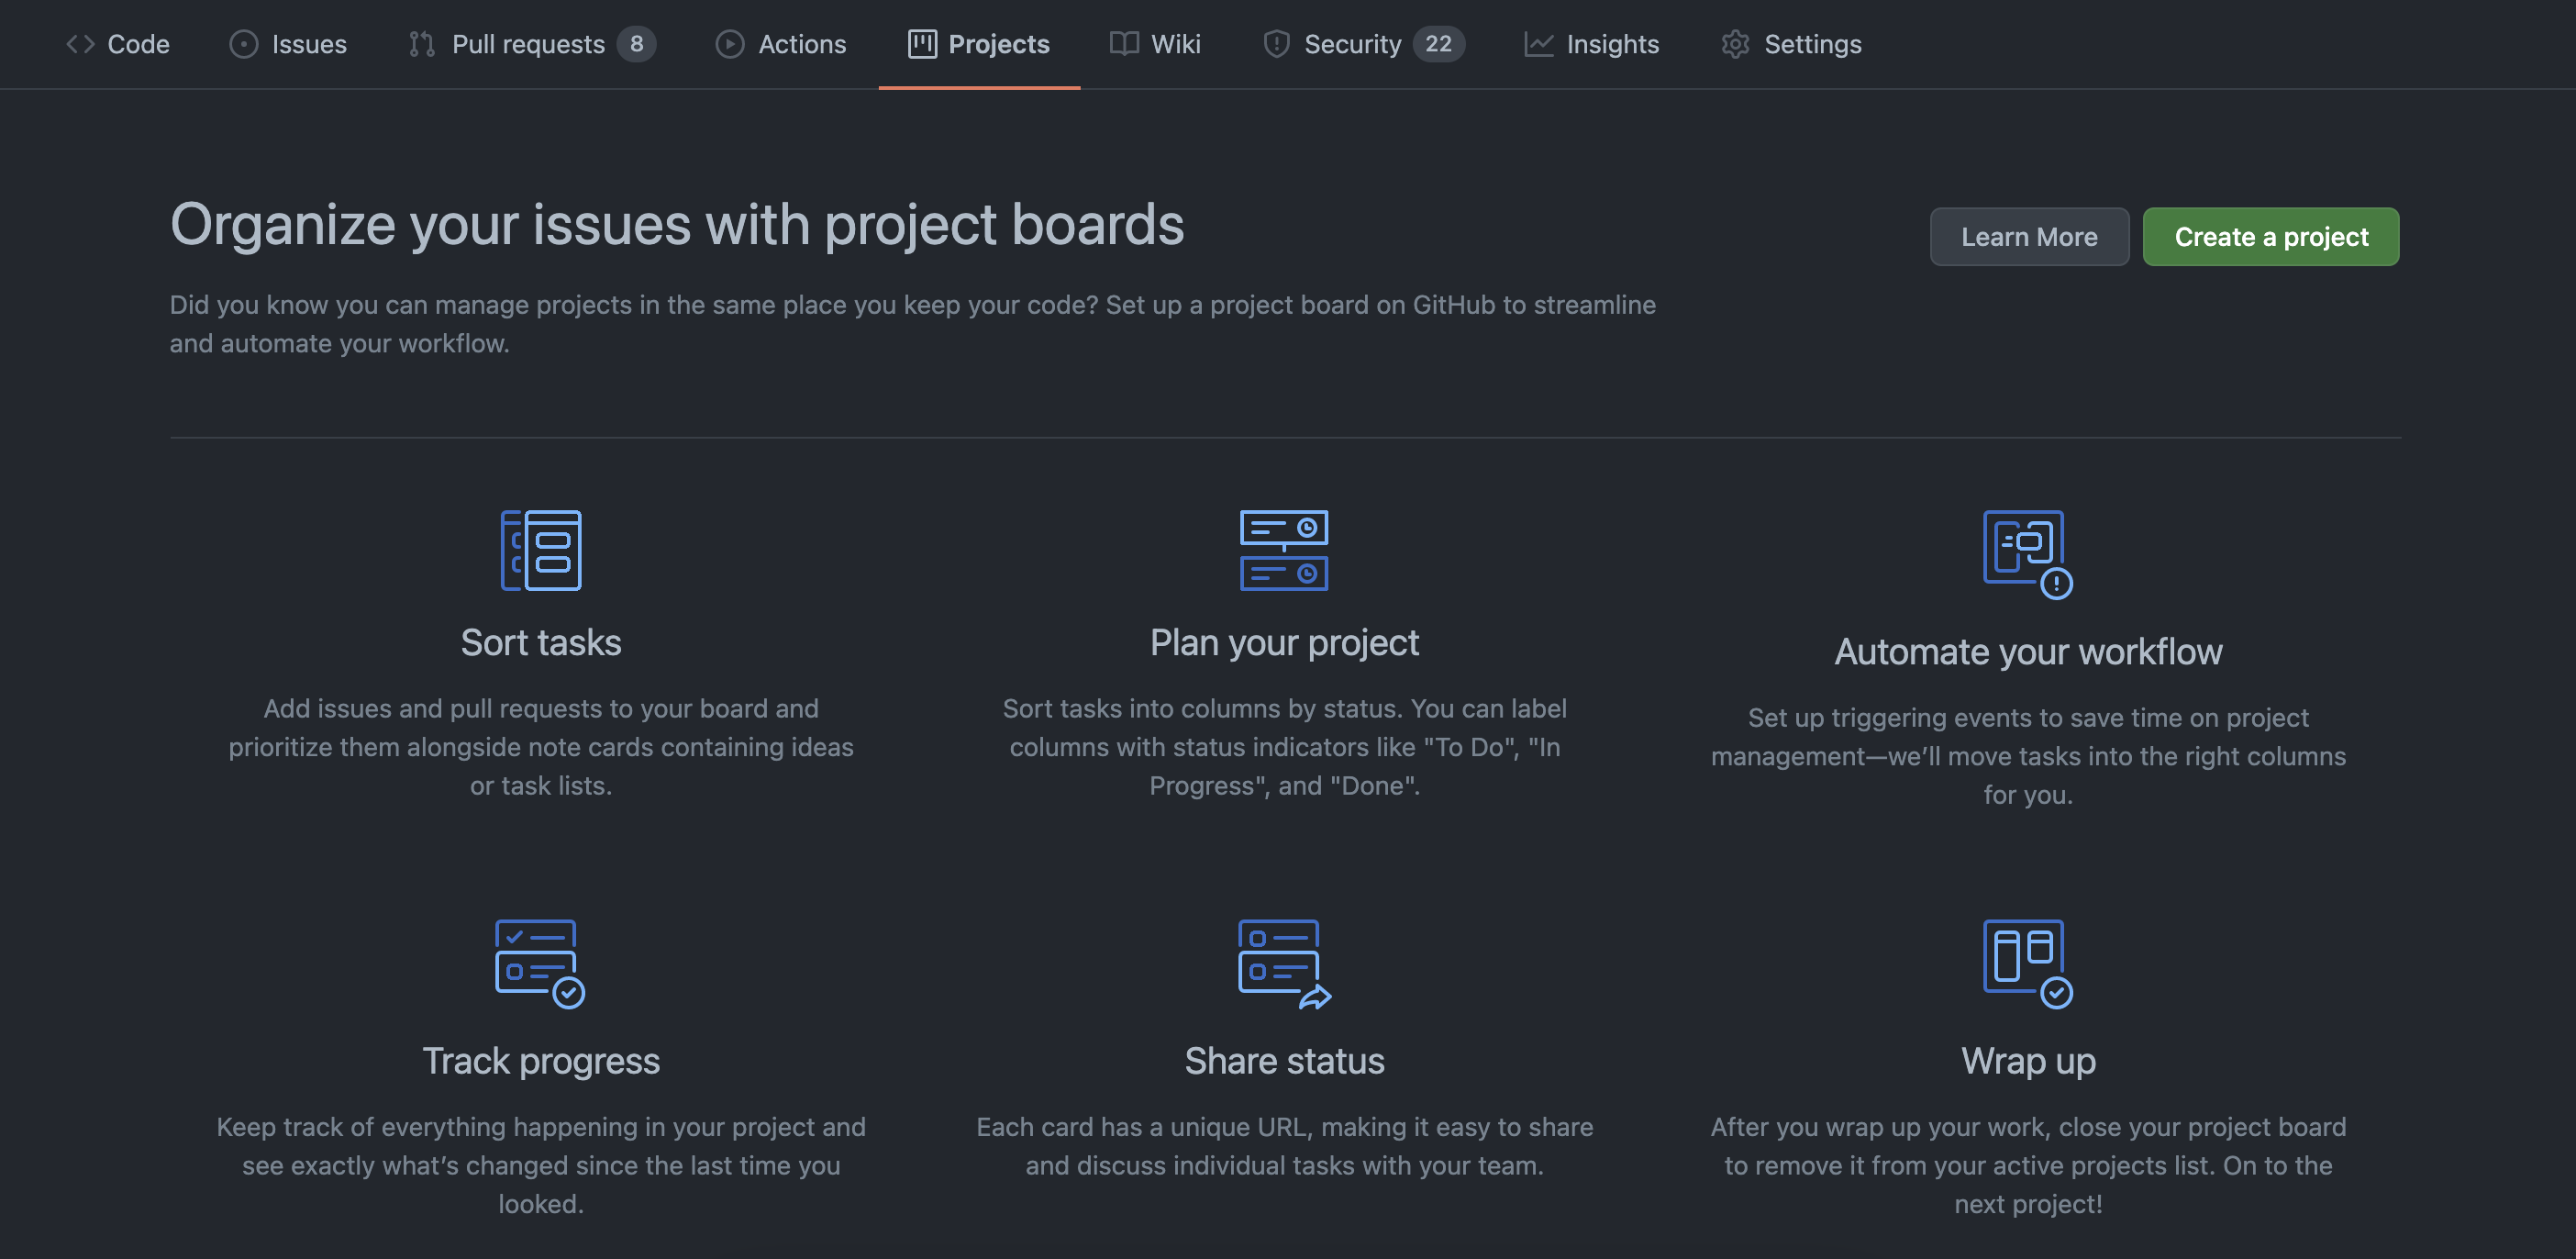 Github projects section that helps you create a kanban board for your repo. Sort tasks, plan your project, automate your workflow, track progress, share status, wrap up.